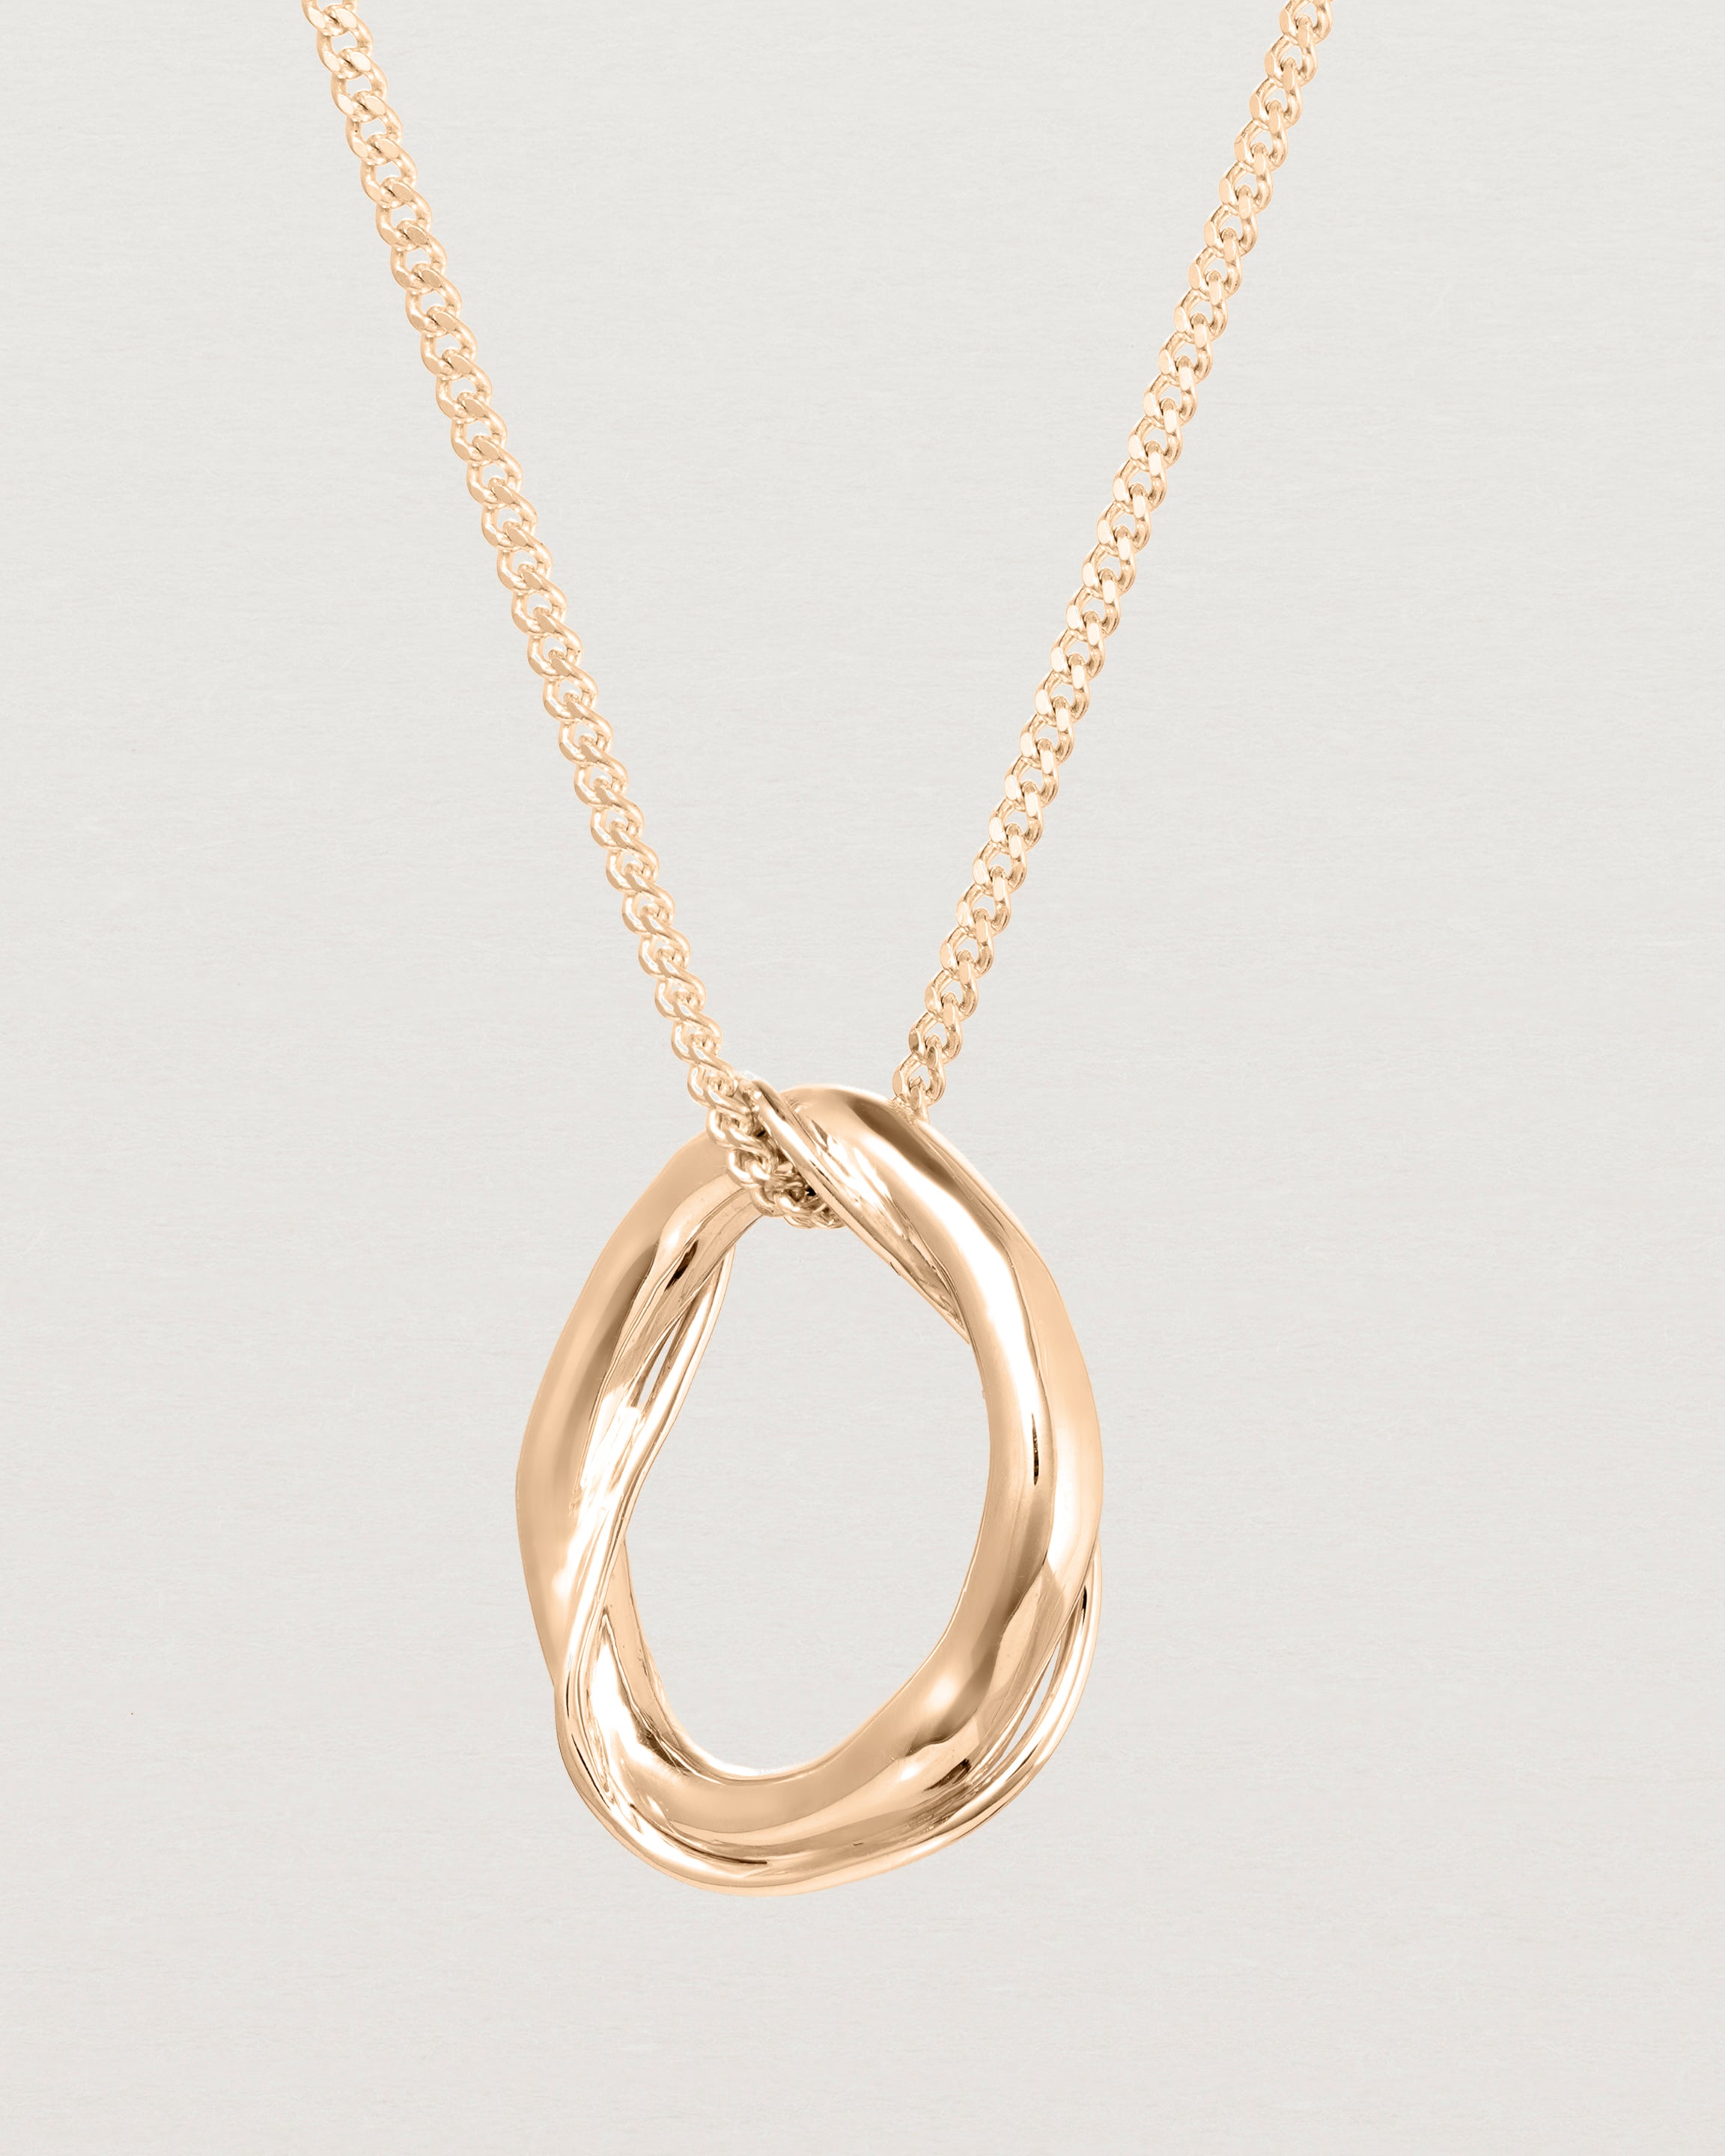 Close up view of the Petite Dalí Necklace in rose gold.